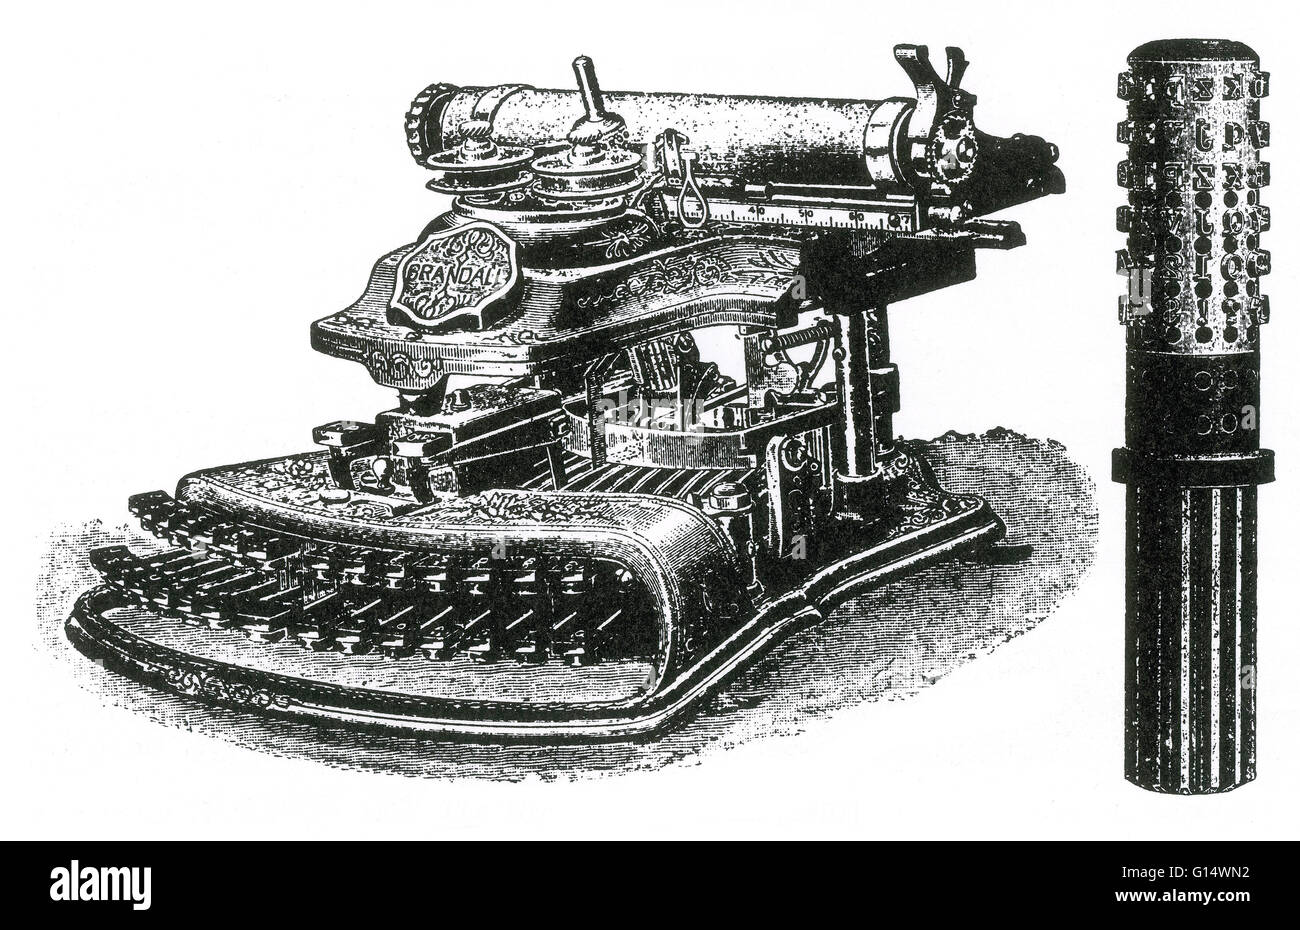 The Crandall Typewriter was patented in 1881 and manufactured by the Crandall Machine Company of Groton, New York. The Crandall used a type sleeve, as opposed to type bars, inked by a ribbon. It also used a non standard two-row keyboard. The type sleeve, Stock Photo